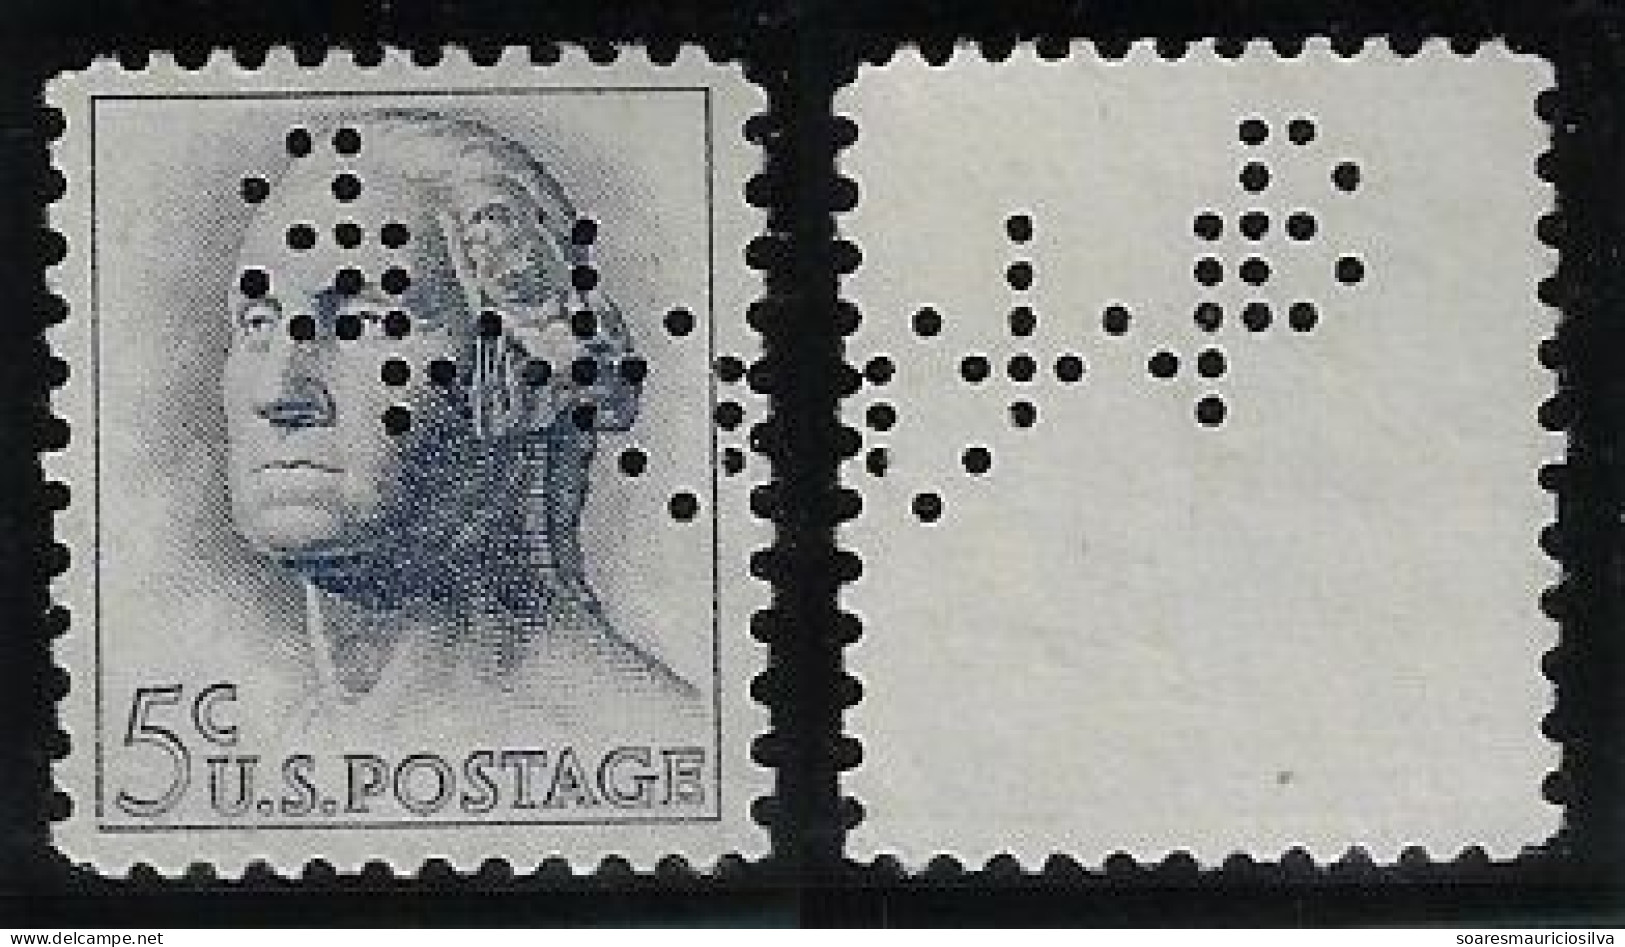 USA United States 1938/1982 Stamp With Perfin CMB By Chase Manhattan Bank From New York Lochung Perfore - Perfins